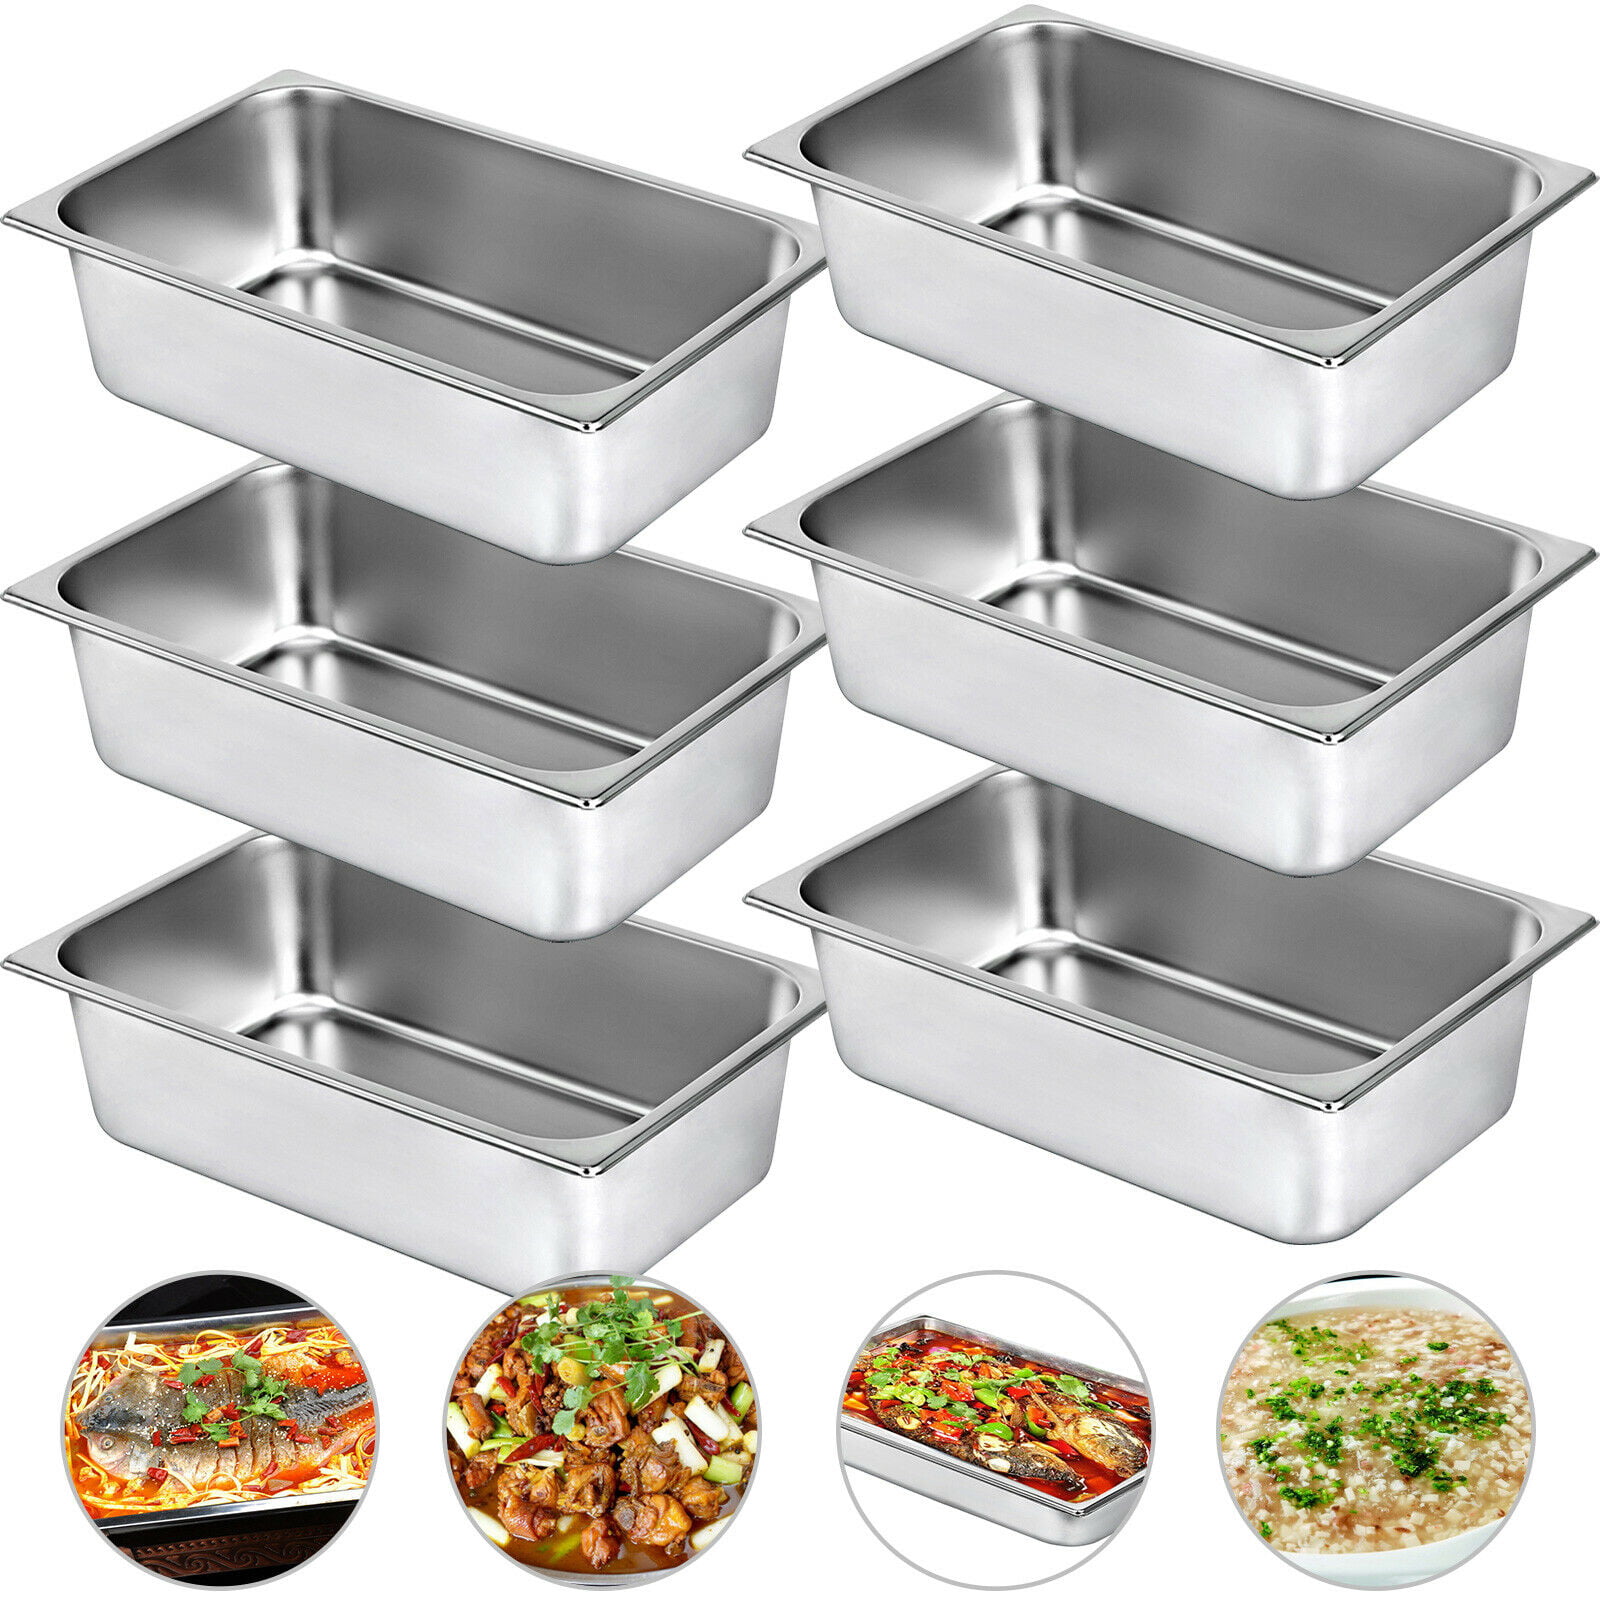 VEVOR Set of 6 Hotel Pan Steam Table Pan Full Size 20x12x6 Inch Full Size Stainless Steel Steam Table Pans